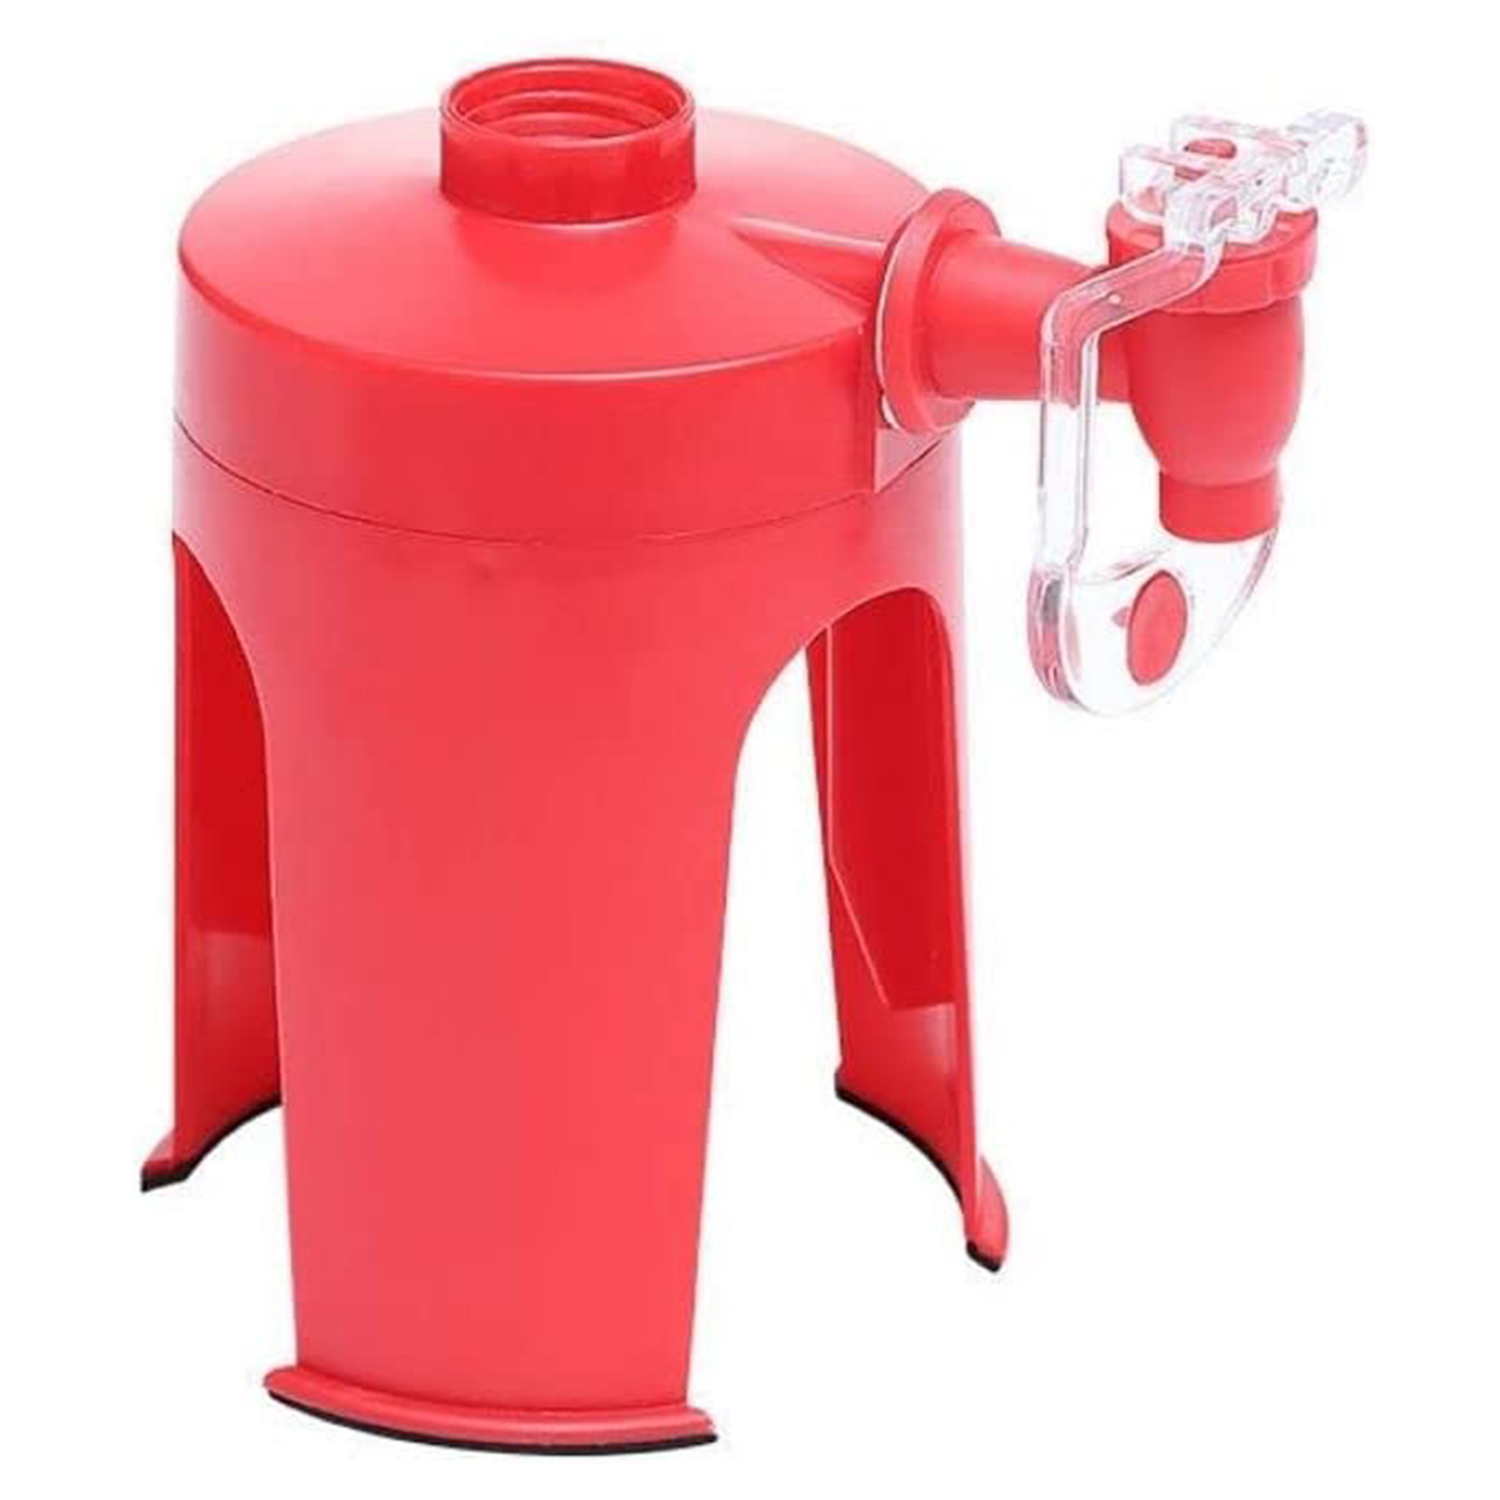 3 in 1 5.2L Beverage Drinking Dispenser Rotating Detachable Water Liquid  Container Fridge Cold Kettle Fruit Juice Maker Bar Tool